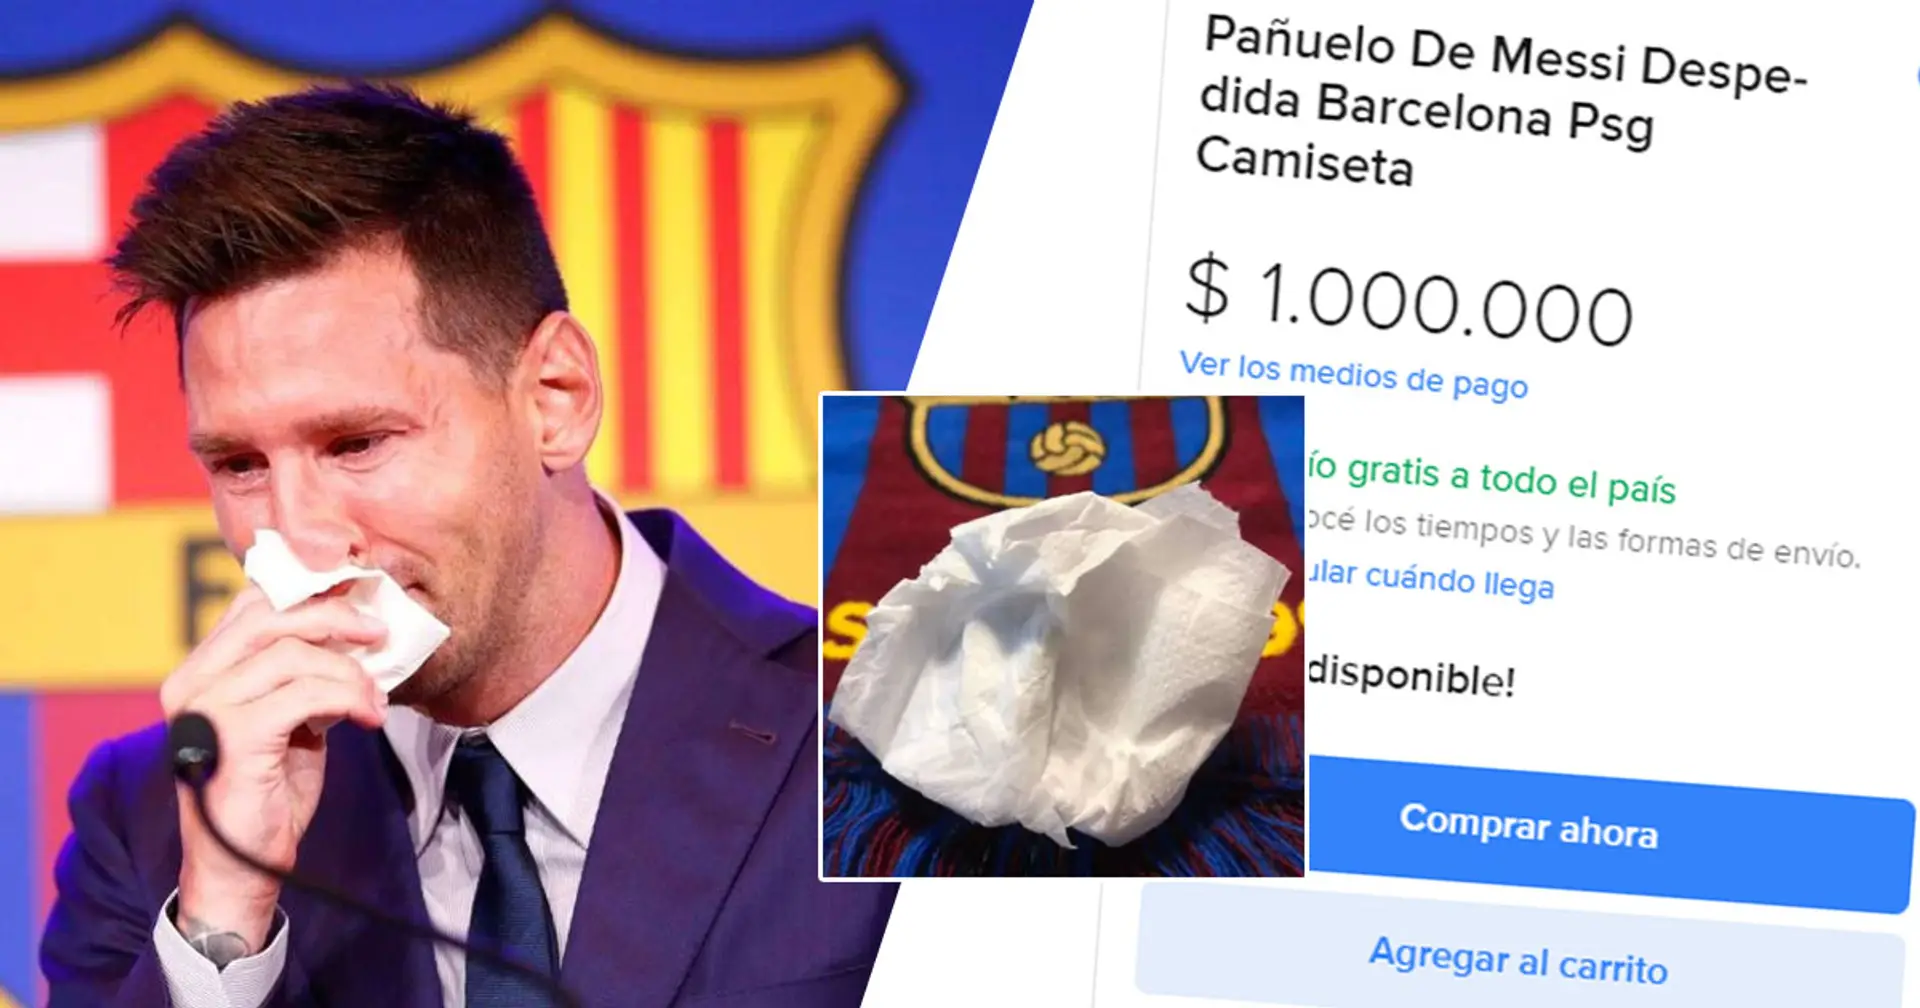 Handkerchief that Messi supposedly cried into during Barca farewell up for sale for $1m